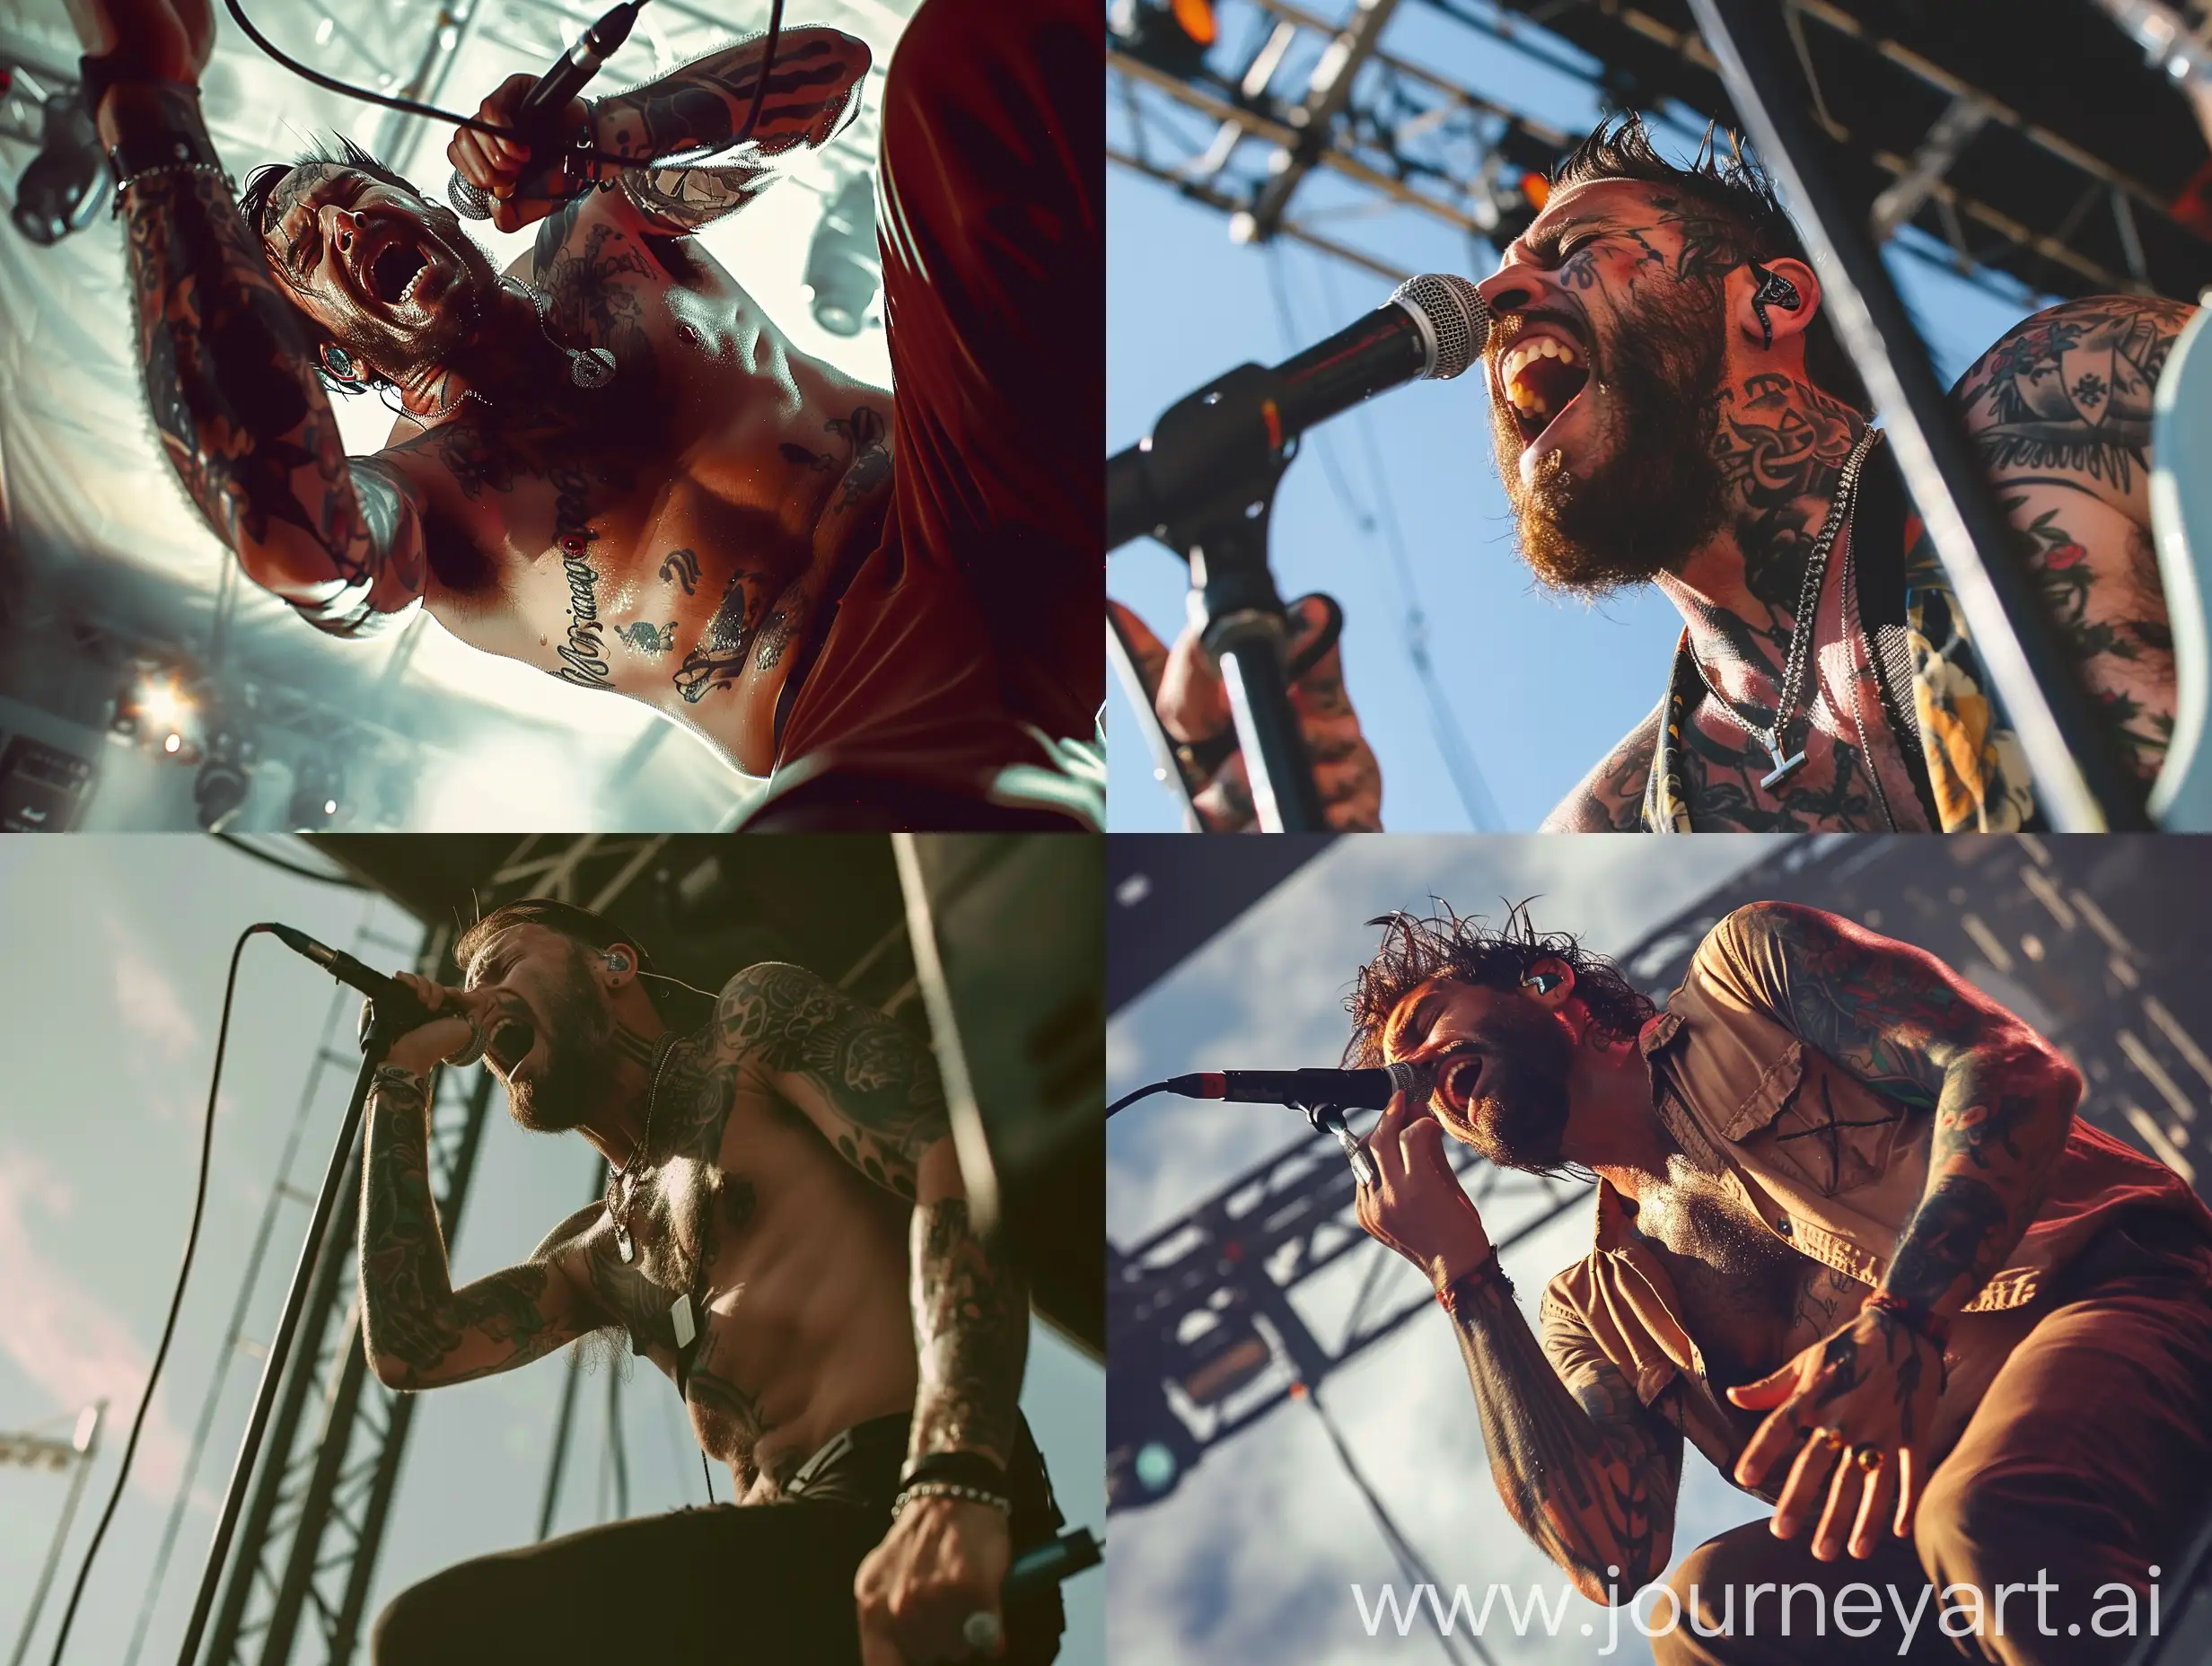 Dynamic-Rock-Festival-Singer-Performing-Live-with-Tattooed-Handsome-Man